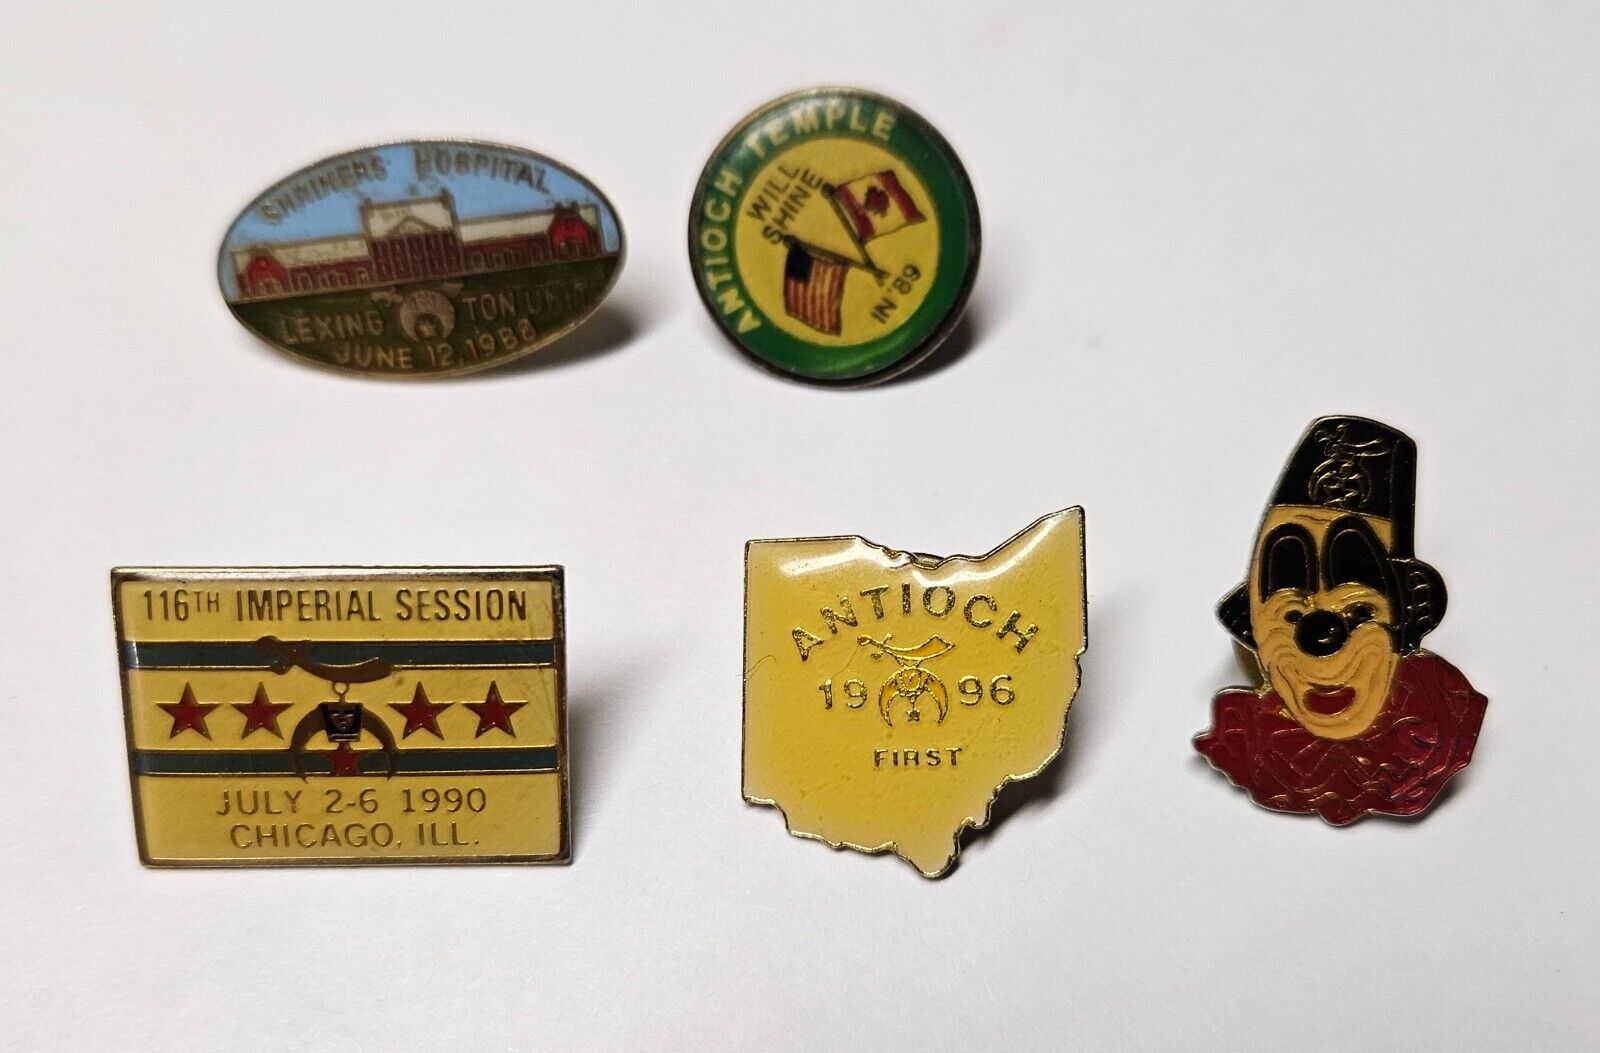 Lot of 5 Antioch Shriners Masonic Temple Hat Pins